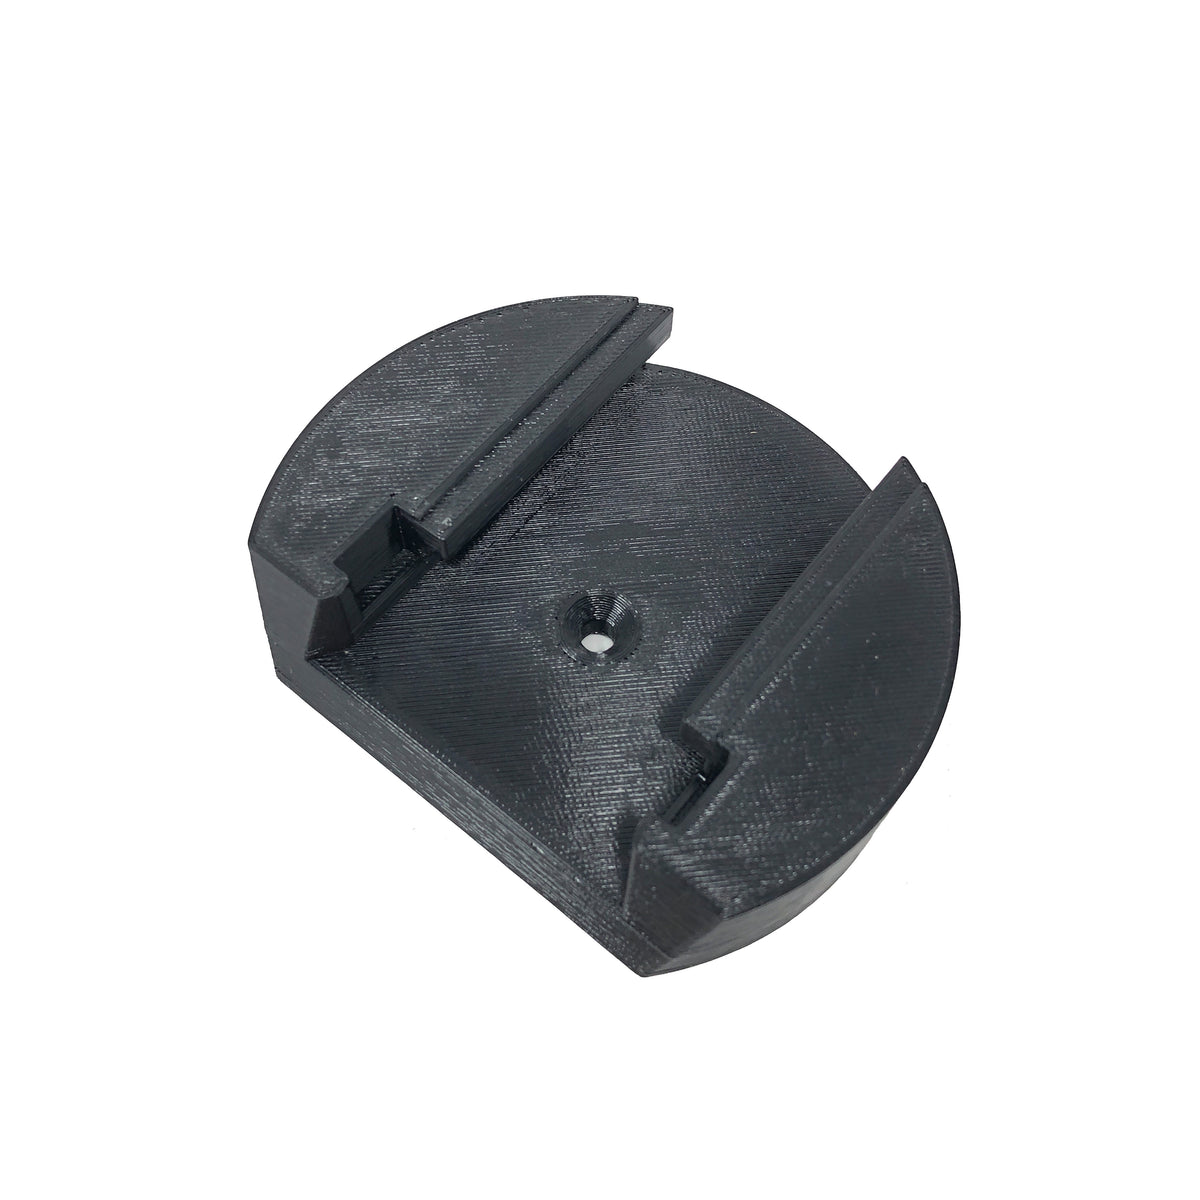 M18 Battery Mount for Locking Foot